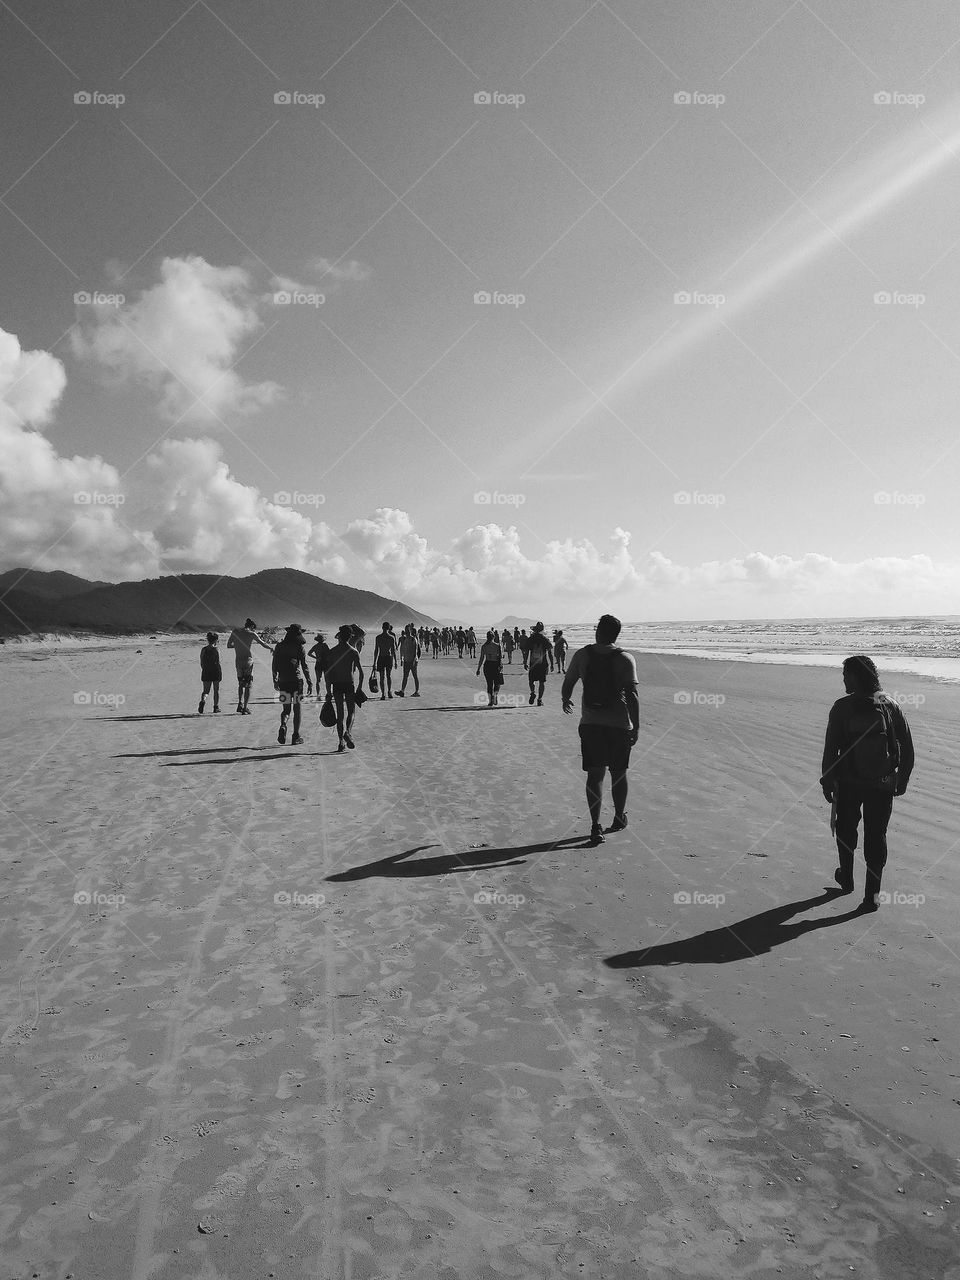 A very large group of people walking on the beach, at Cardoso's Island, Ilha do Cardoso, Brasil.
A beautiful sunny day at the beach, in a black and white photo.